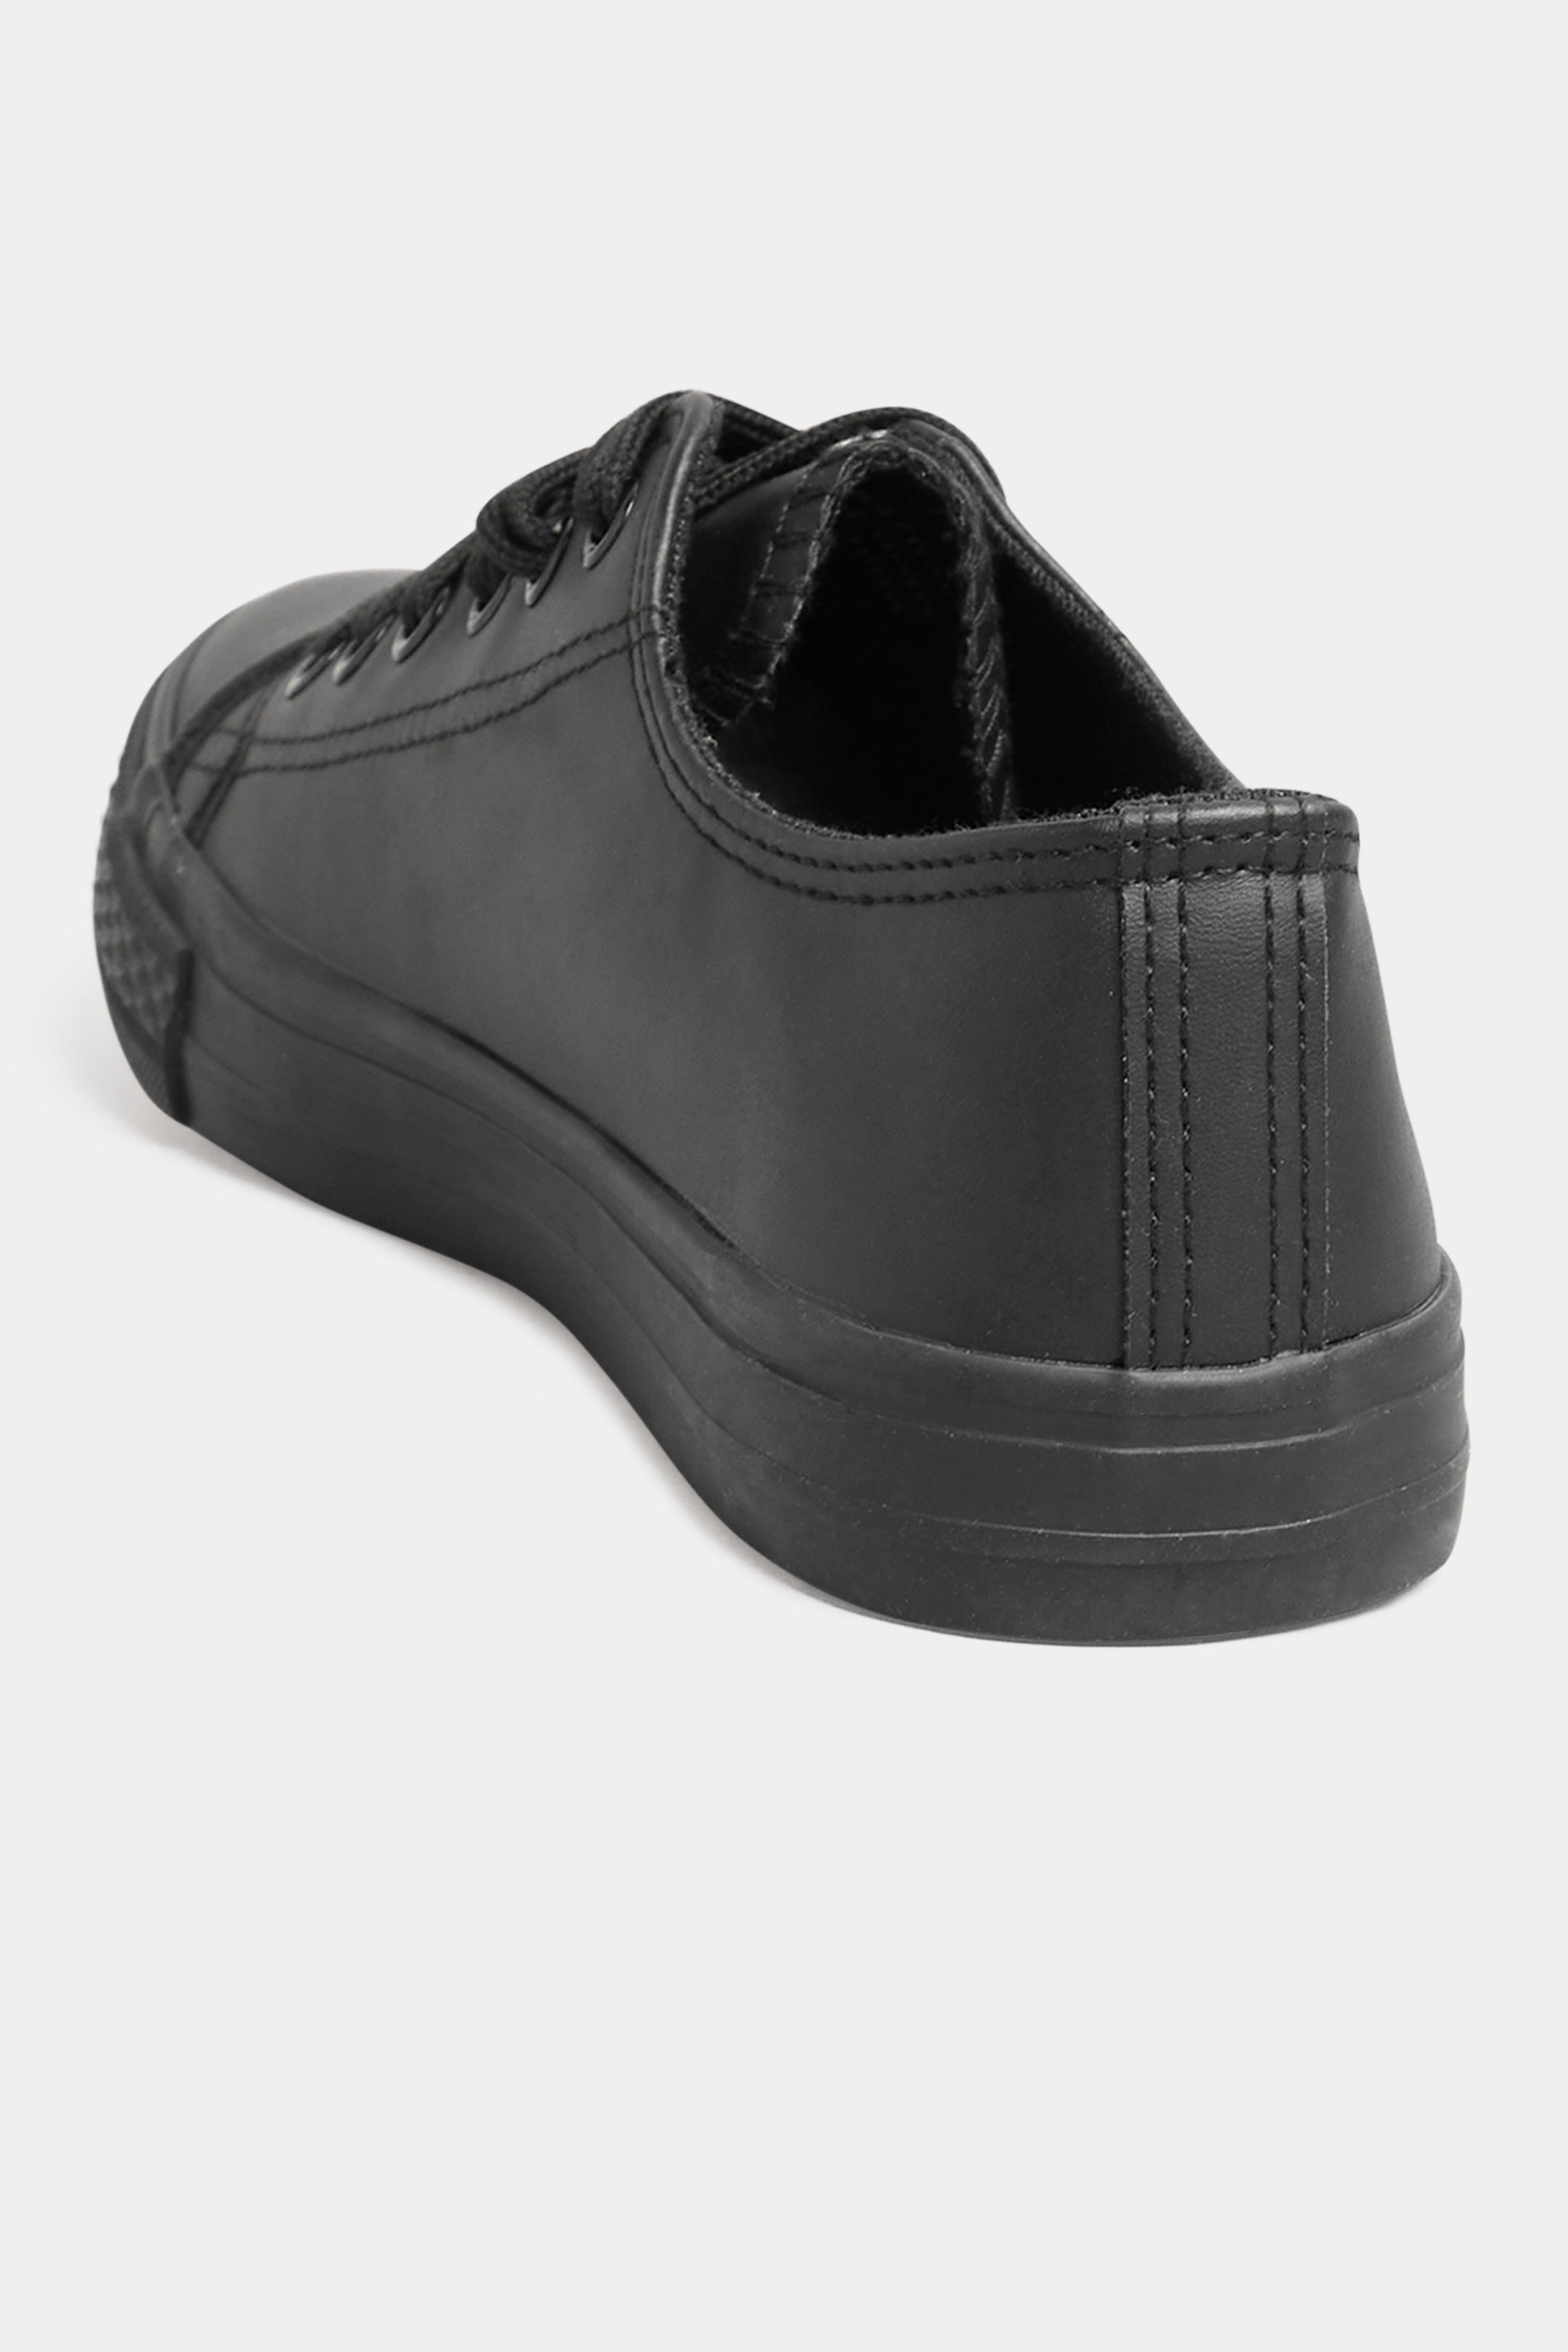 Chaussures Pieds Larges Tennis & Baskets Pieds Larges | Tennis Noires Plates Pieds Extra Larges EEE - LM77095